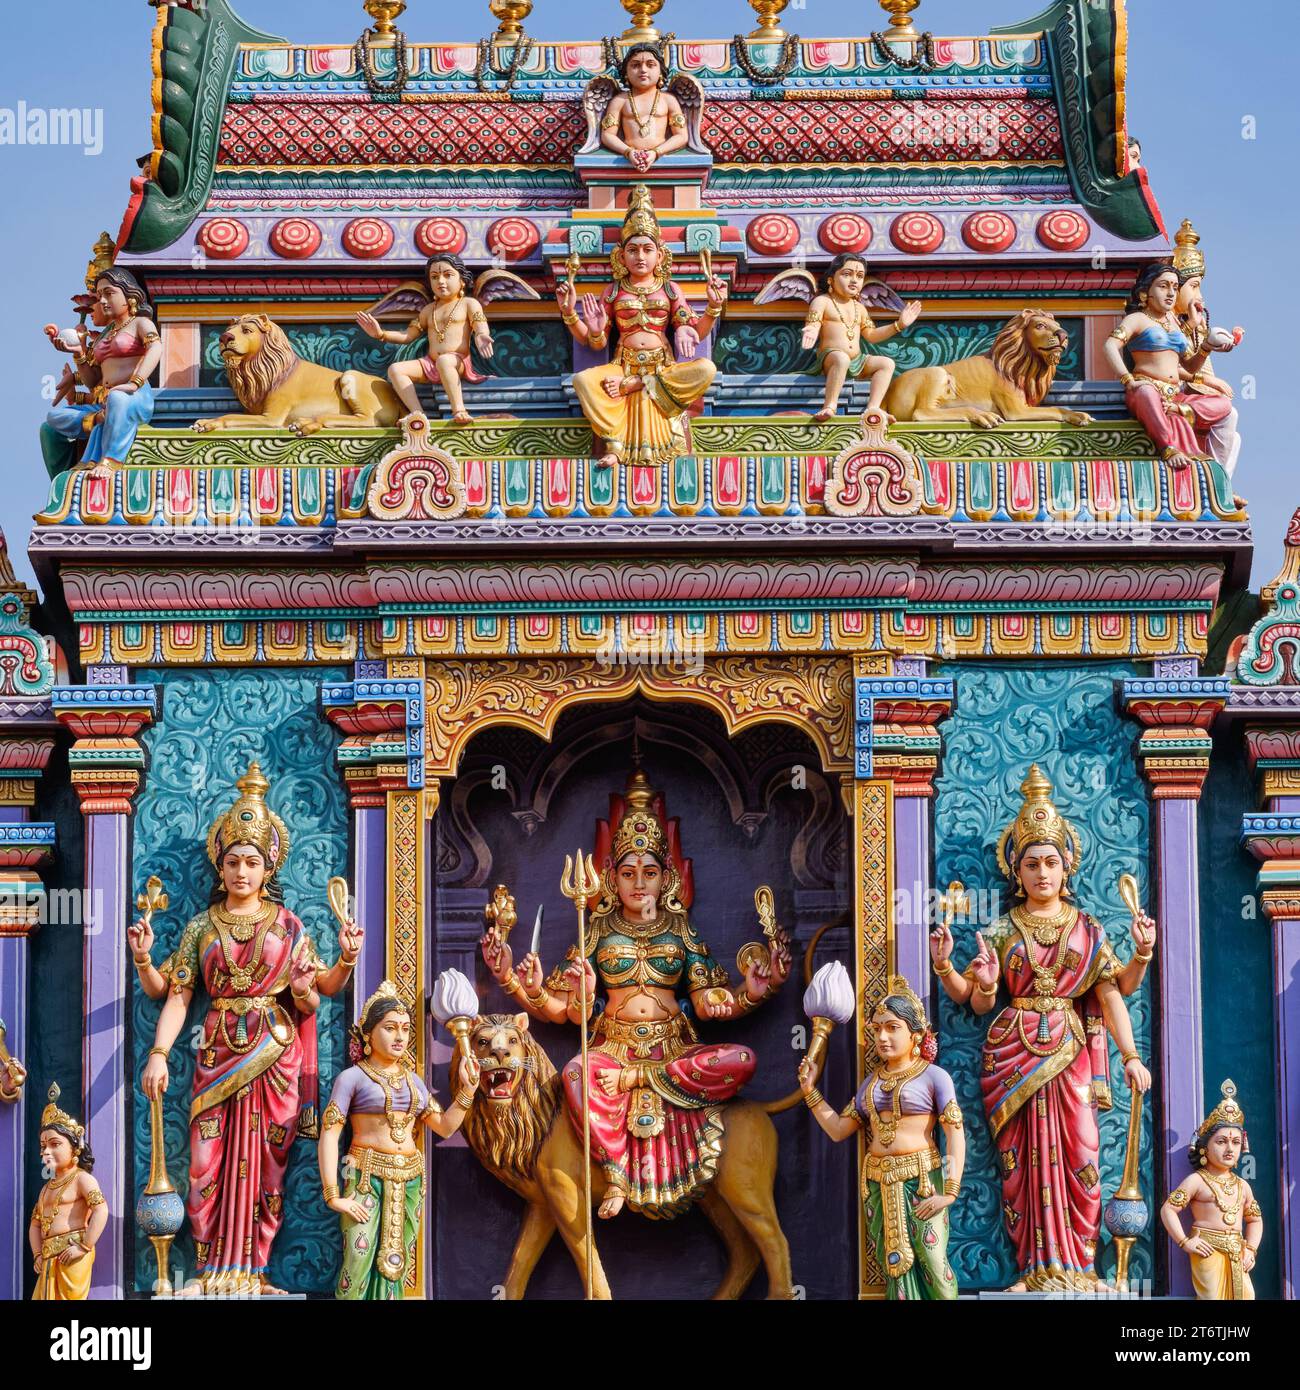 The top of the gopuram (entrance tower) of Sri Vadapathira Kaliammam Temple, with colorful figures of Hindu deities; Little India, Singapore Stock Photo